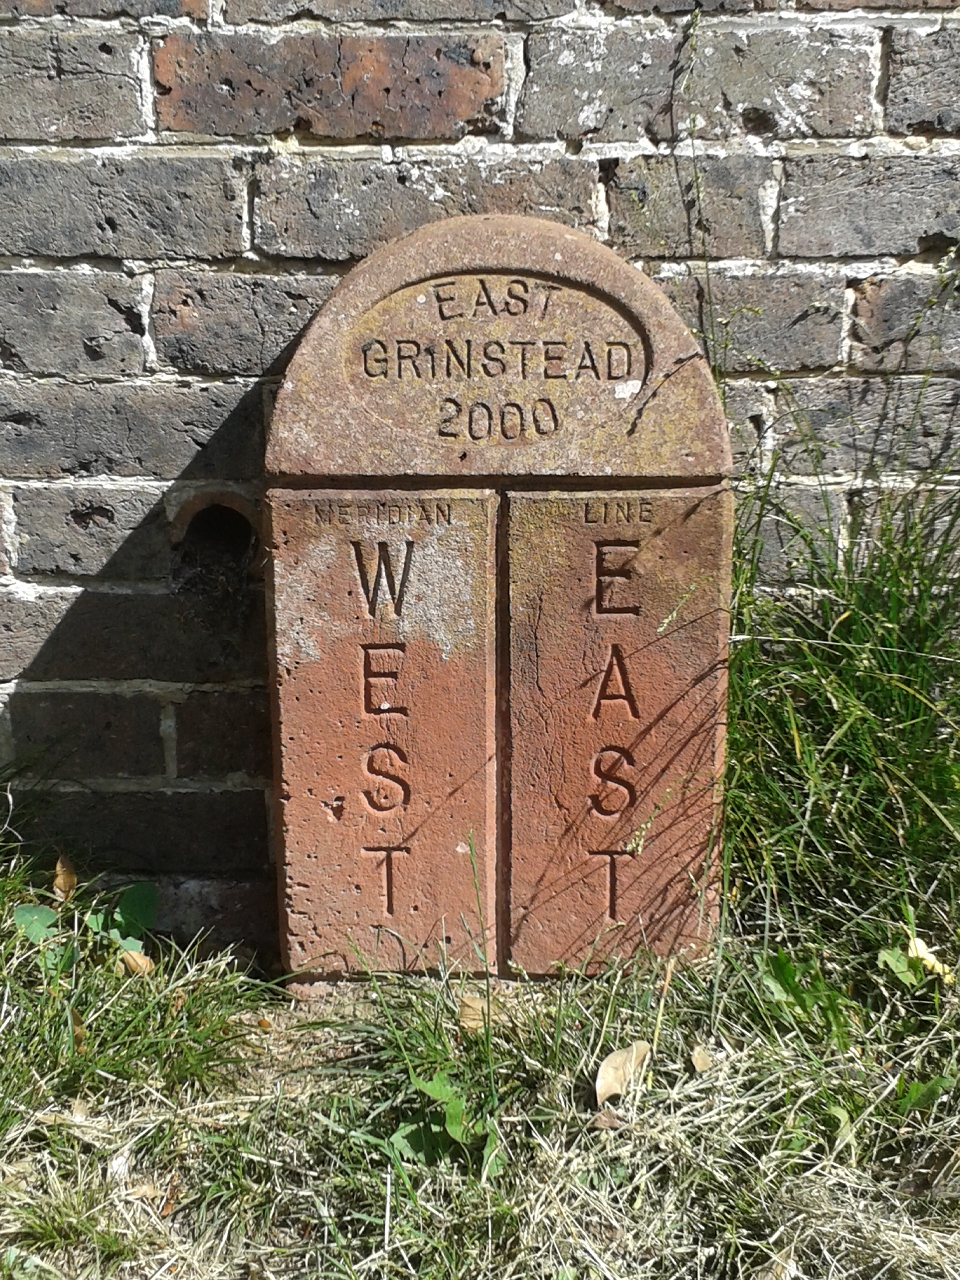 Marker stone showing Meridian Line © East Grinstead Town Promotions